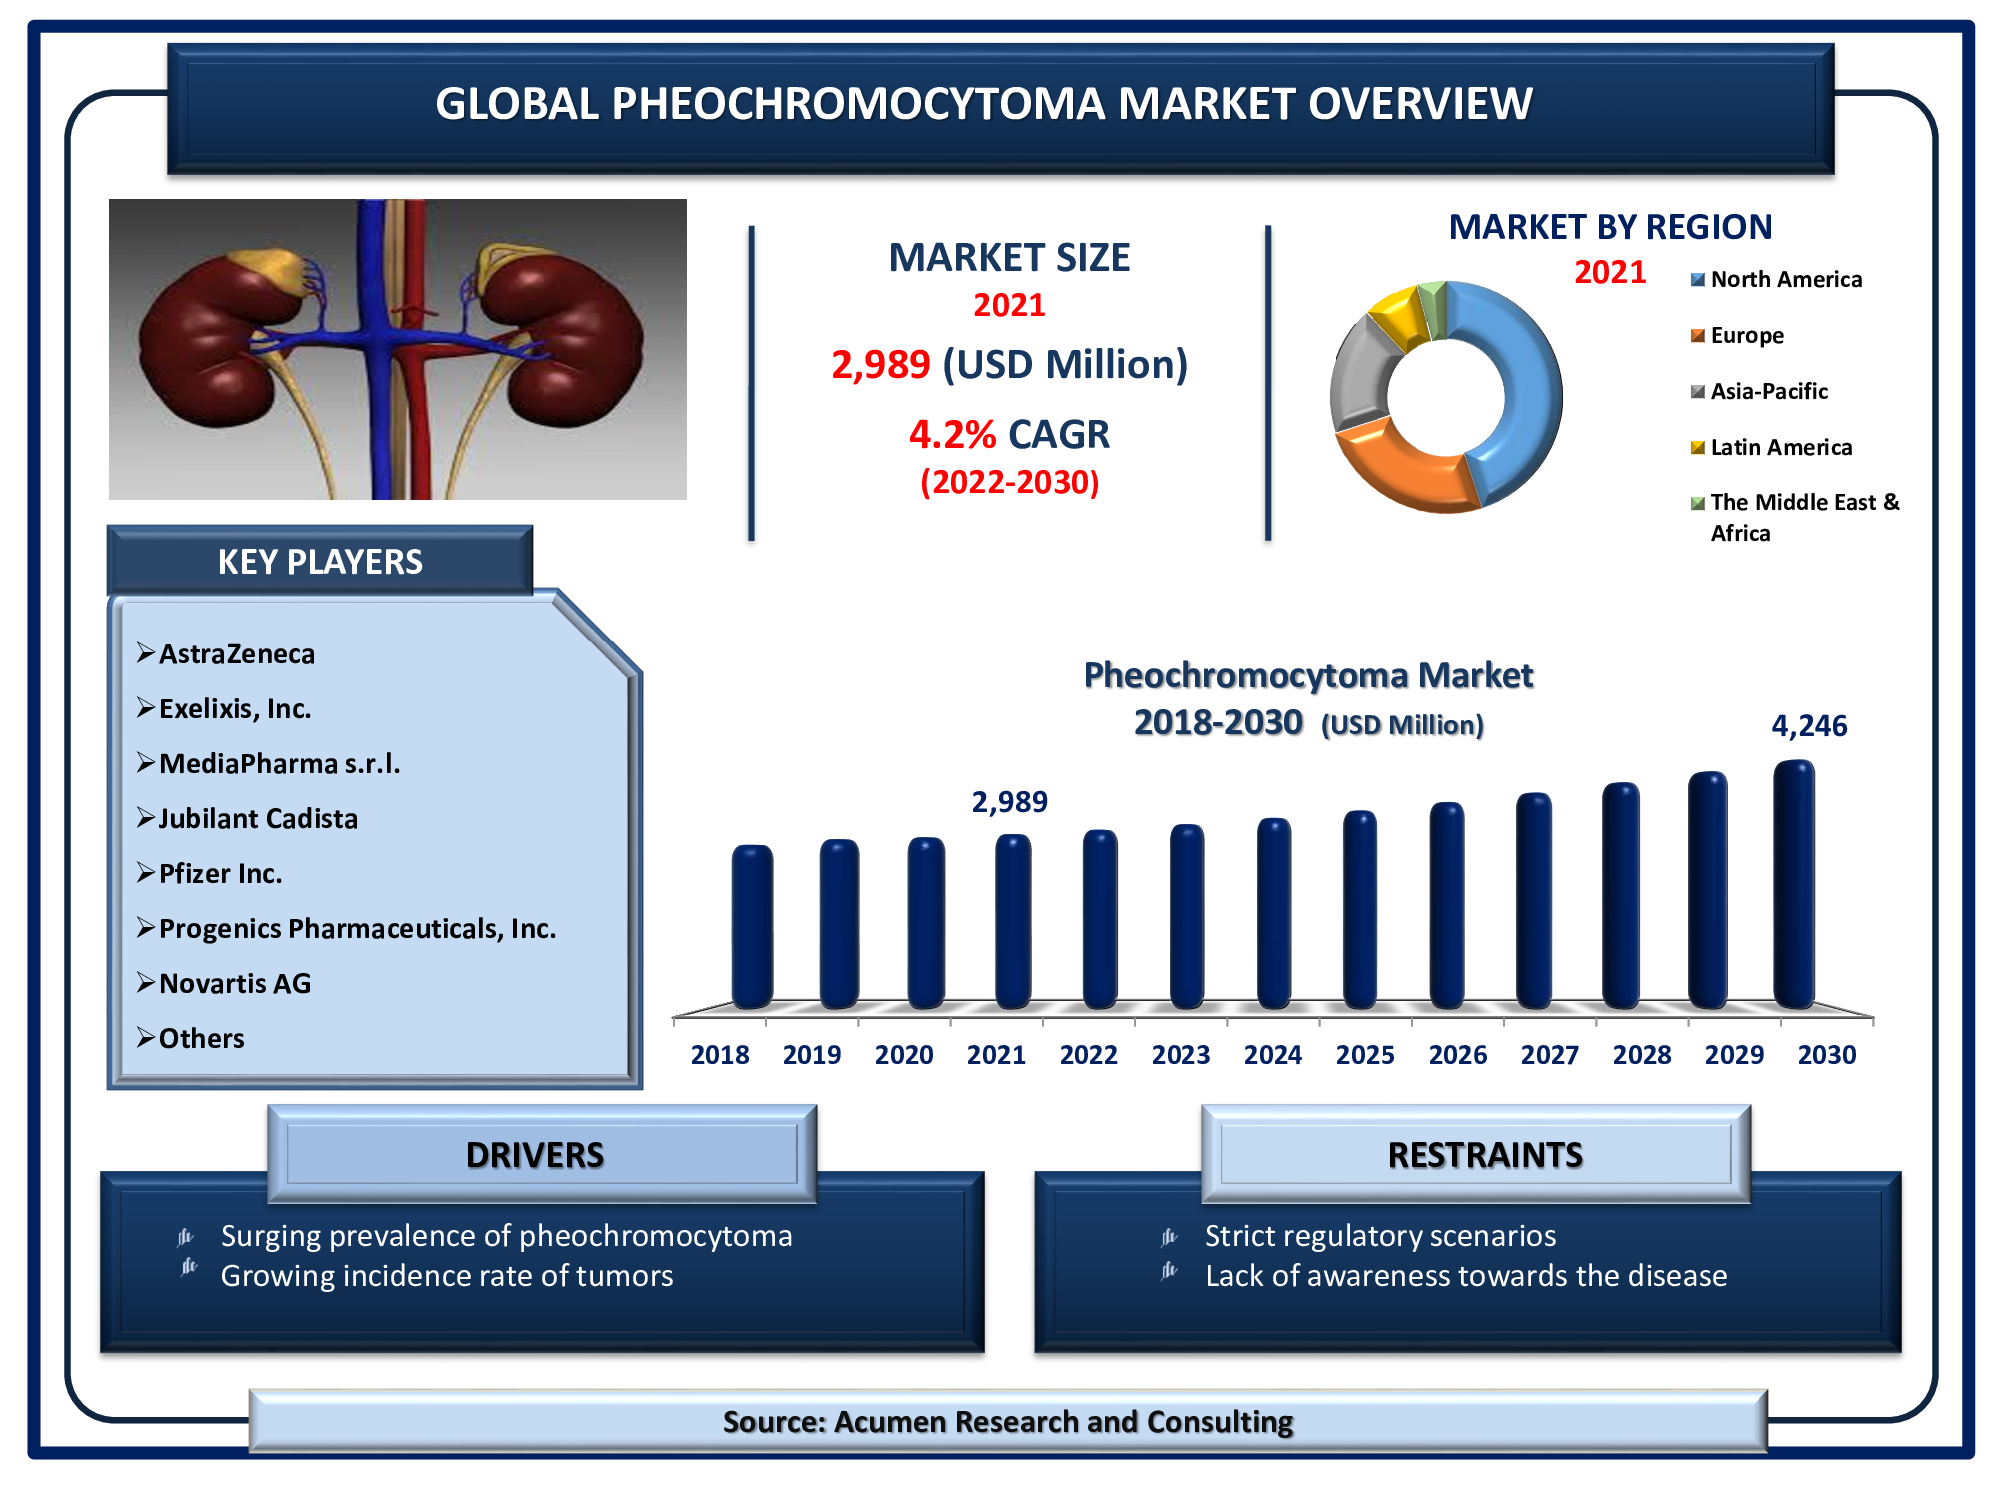 Pheochromocytoma Market will achieve a market size of USD 4,246 Million by 2030, budding at a CAGR of 4.2%